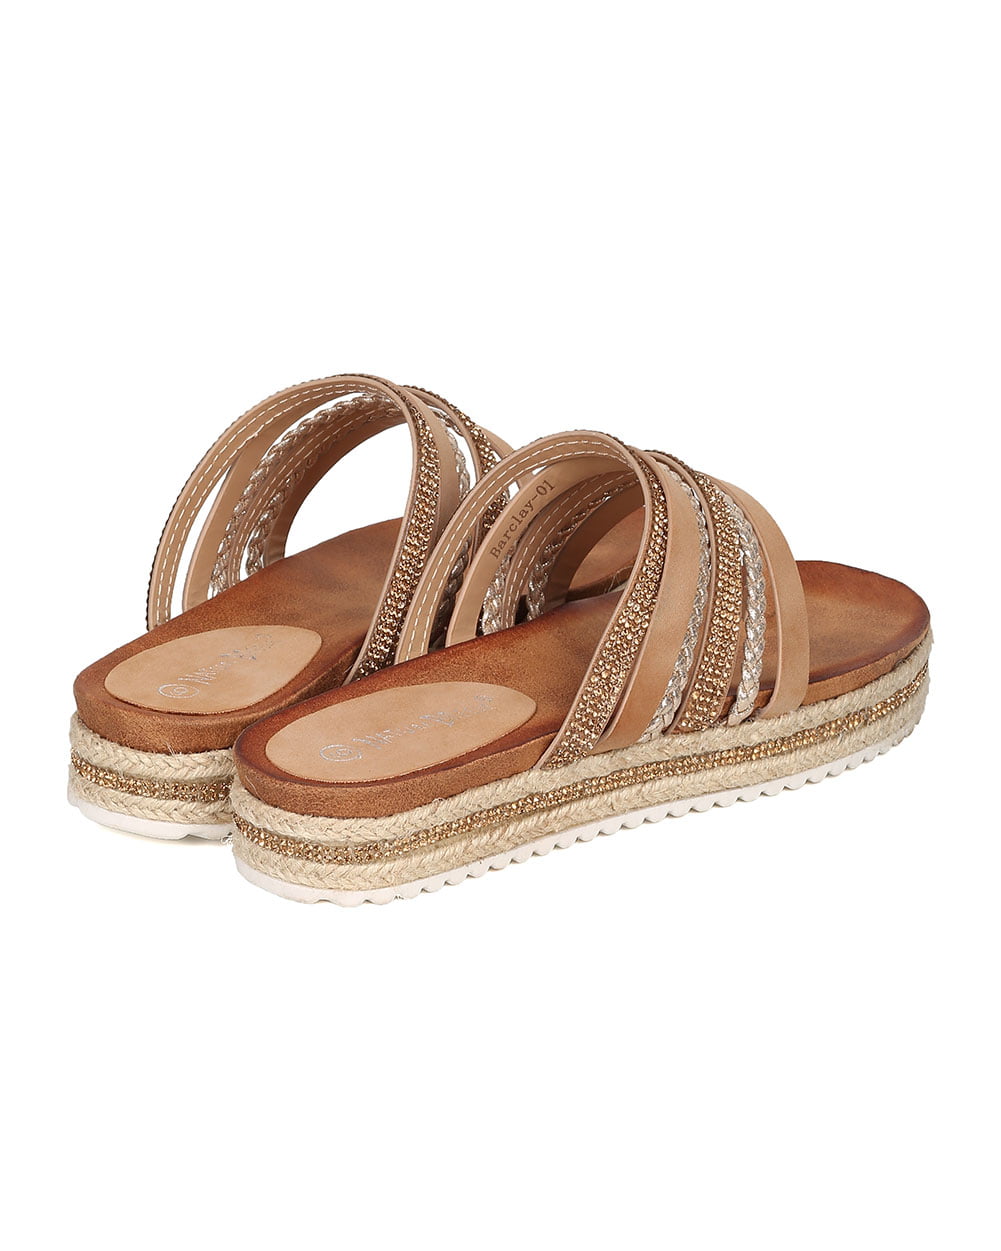 New Women Nature Breeze Barclay01 Mixed Media Toe Ring Espadrille Footbed Sandal 